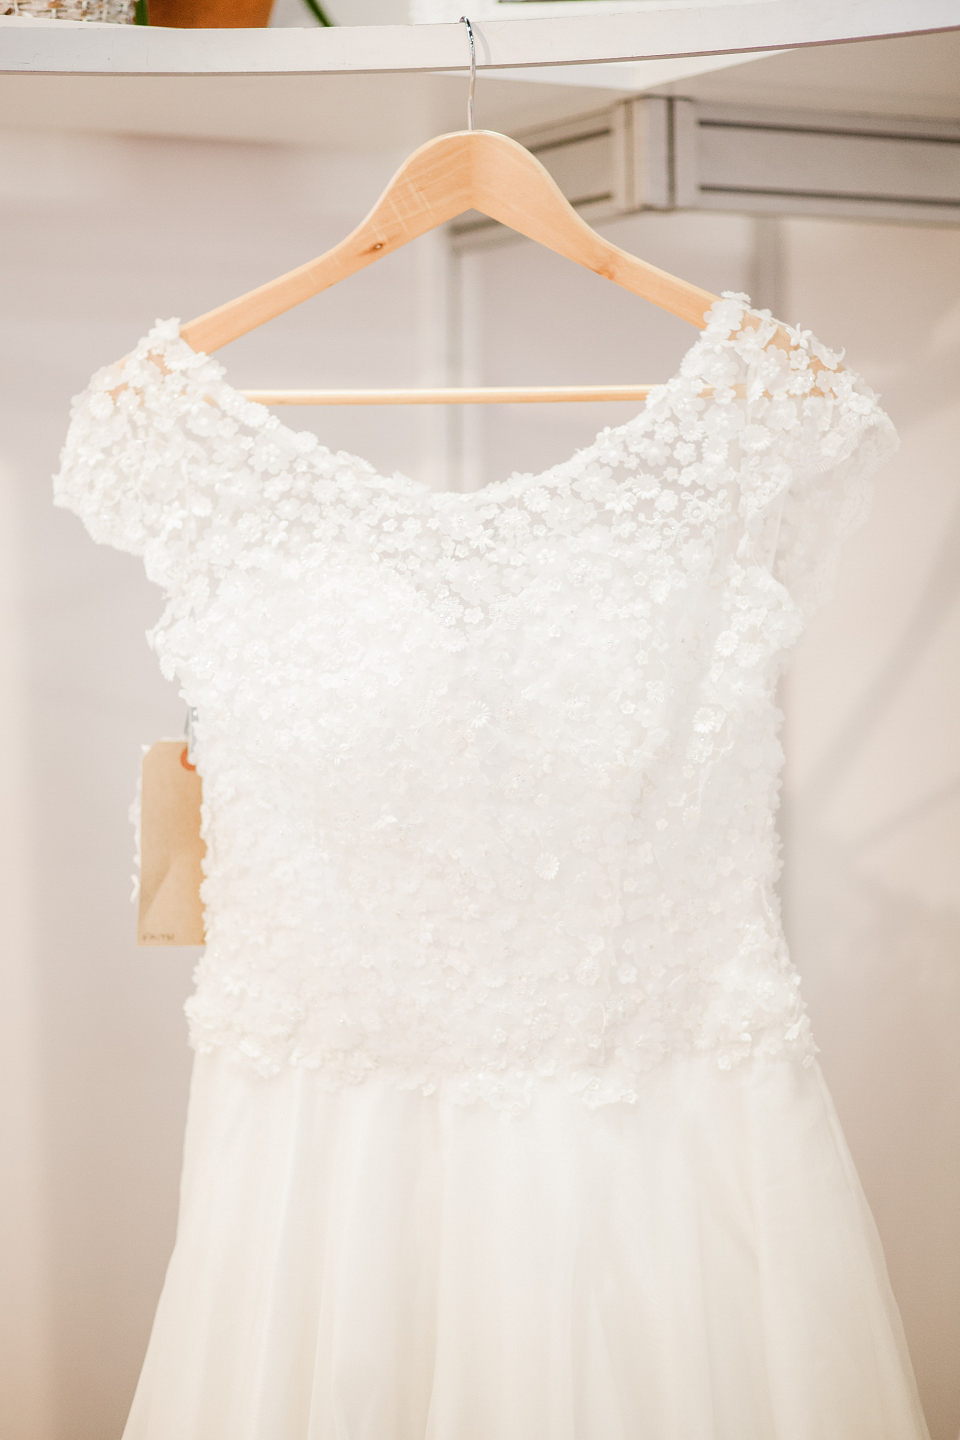 Emma Tindley wedding dresses at The White Gallery, London, April 2014